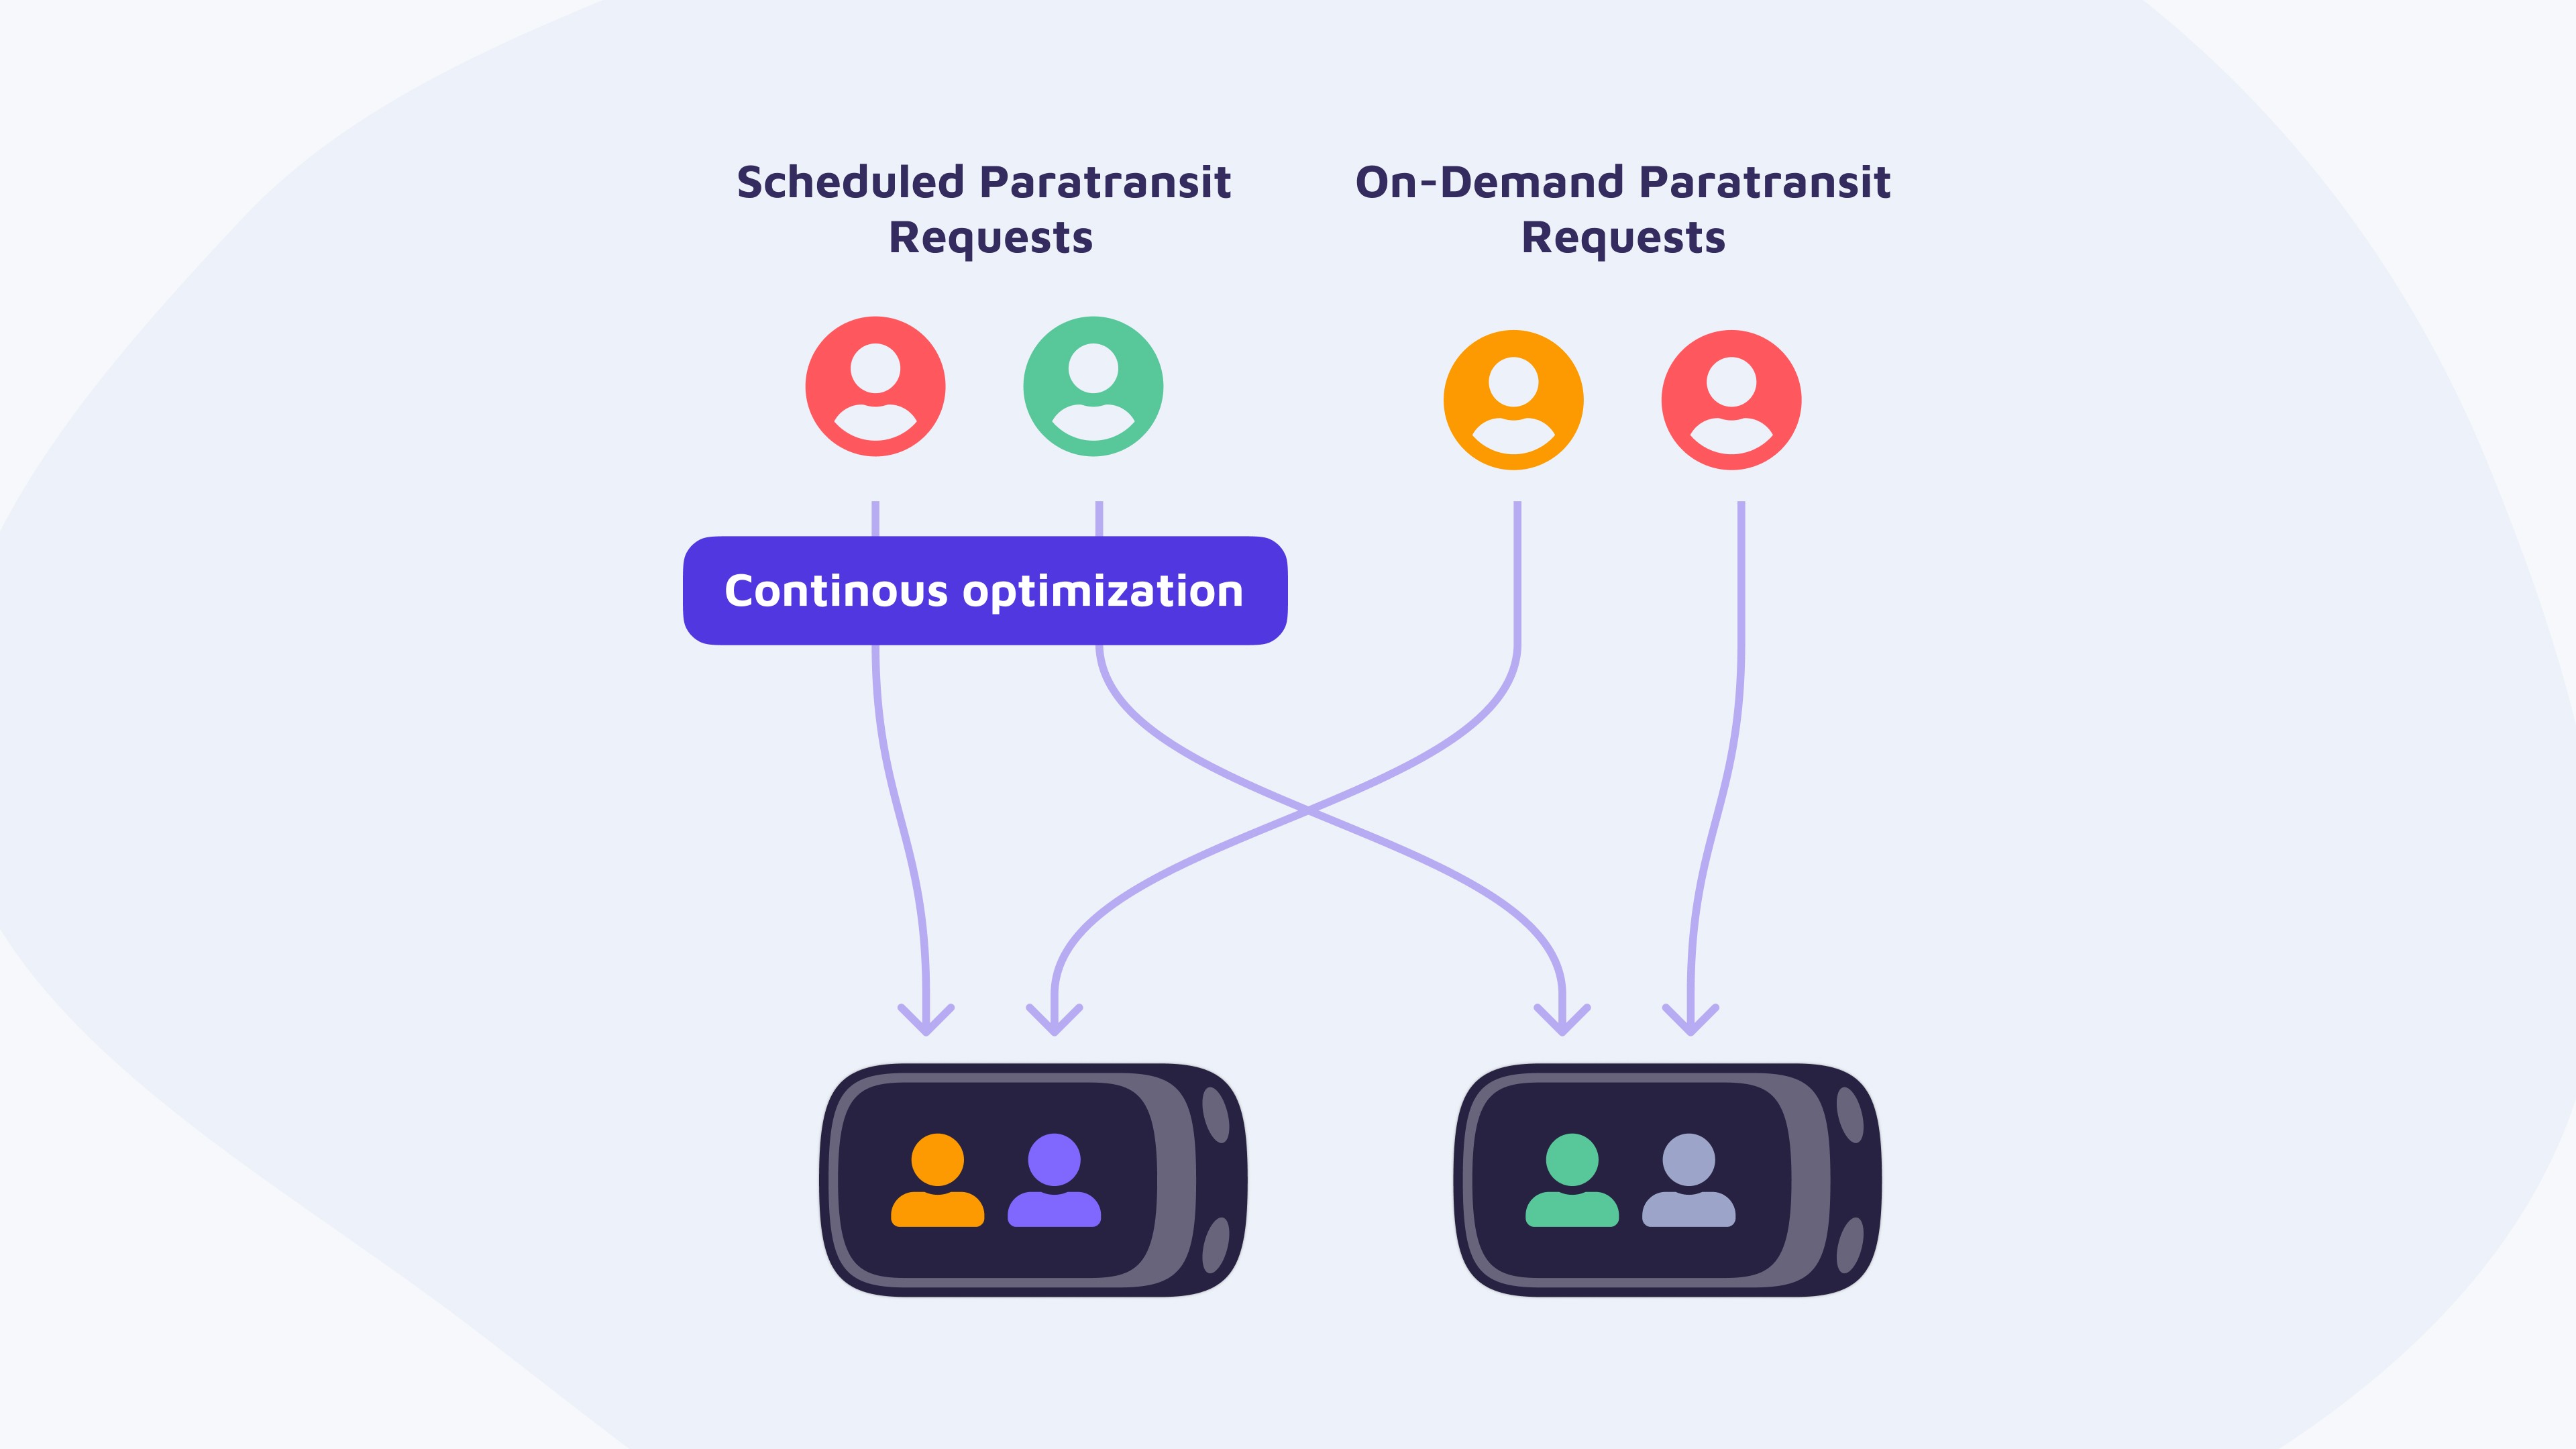 Scheduled and on-demand paratransit